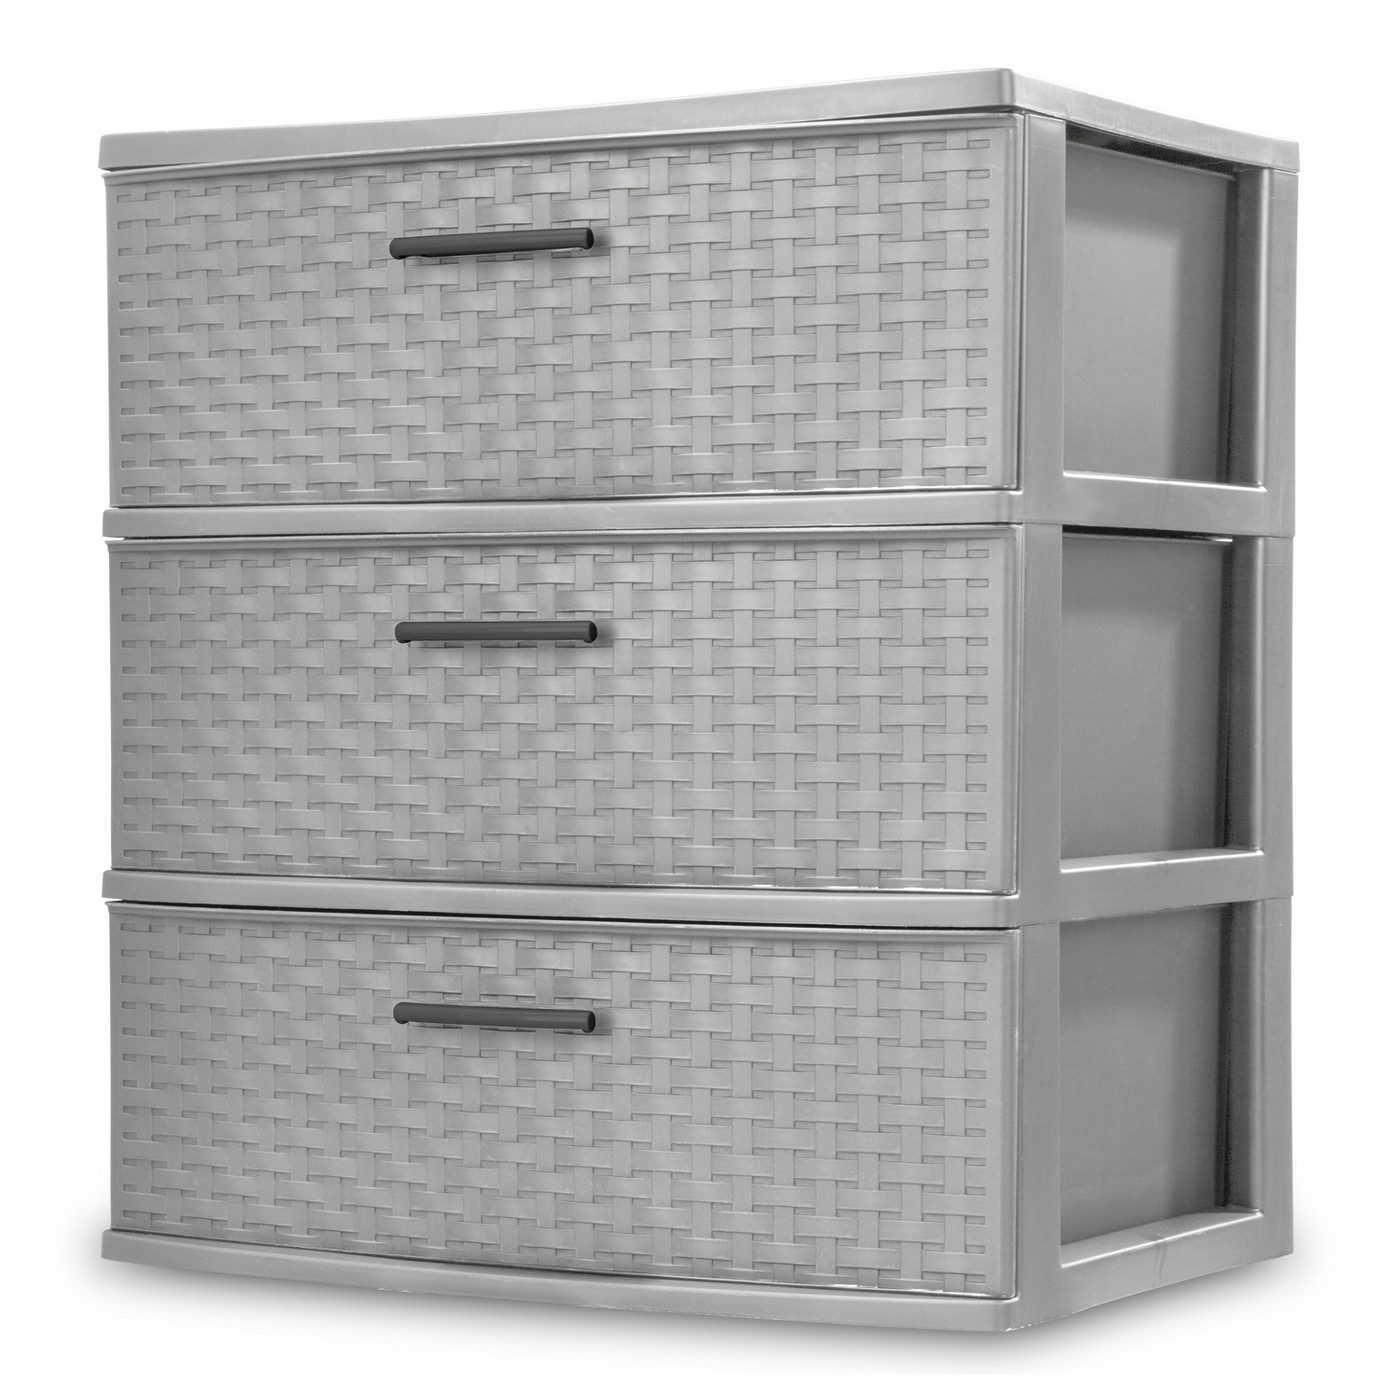 Sterilite Wide 3 Drawer Weave Tower Cement Gray - image 1 of 3